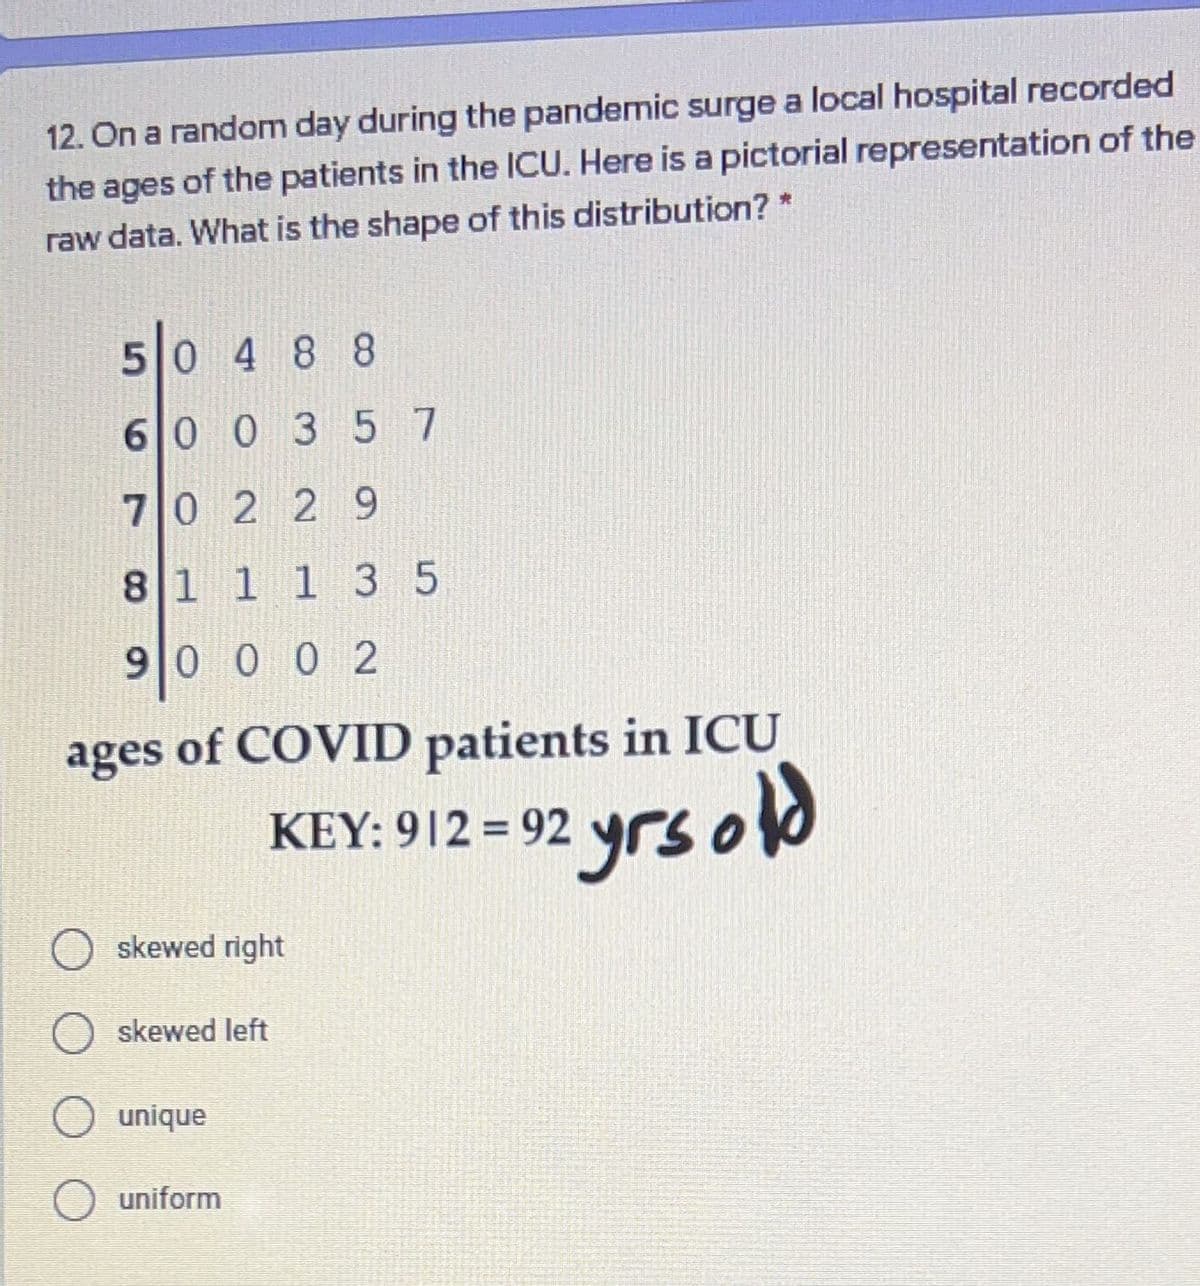 12. On a random day during the pandemic surge a local hospital recorded
the ages of the patients in the IICU. Here is a pictorial representation of the
raw data. What is the shape of this distribution? *
50 488
60 0 3 5 7
70 229
81 11 3 5
90 0 0 2
ages of COVID patients in ICU
yrsold
KEY: 912 = 92
O skewed right
skewed left
O unique
uniform
